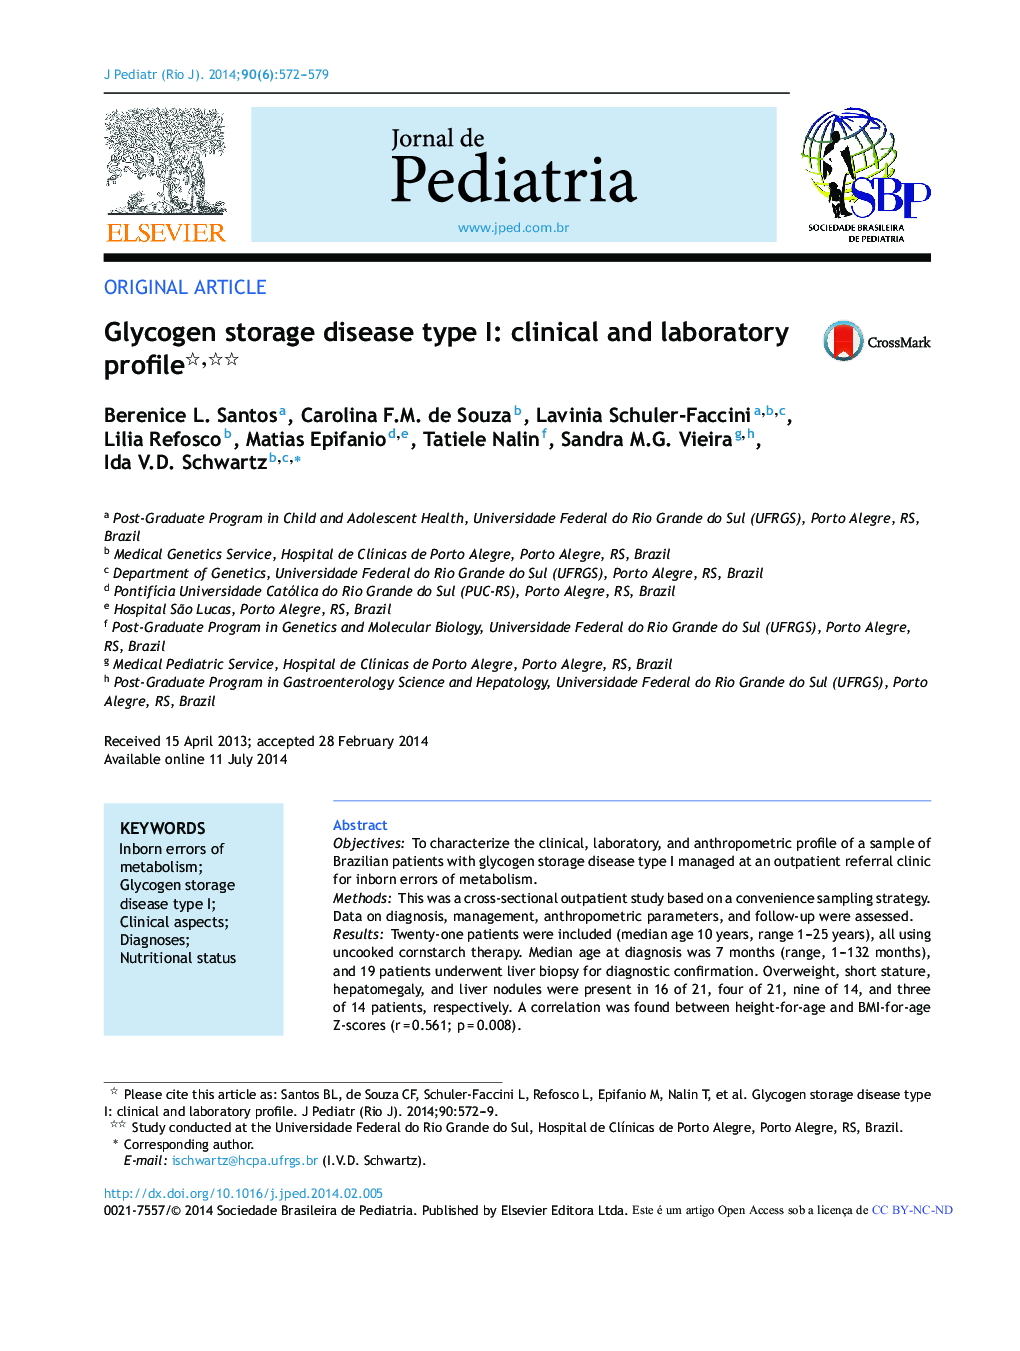 Glycogen storage disease type I: clinical and laboratory profile 